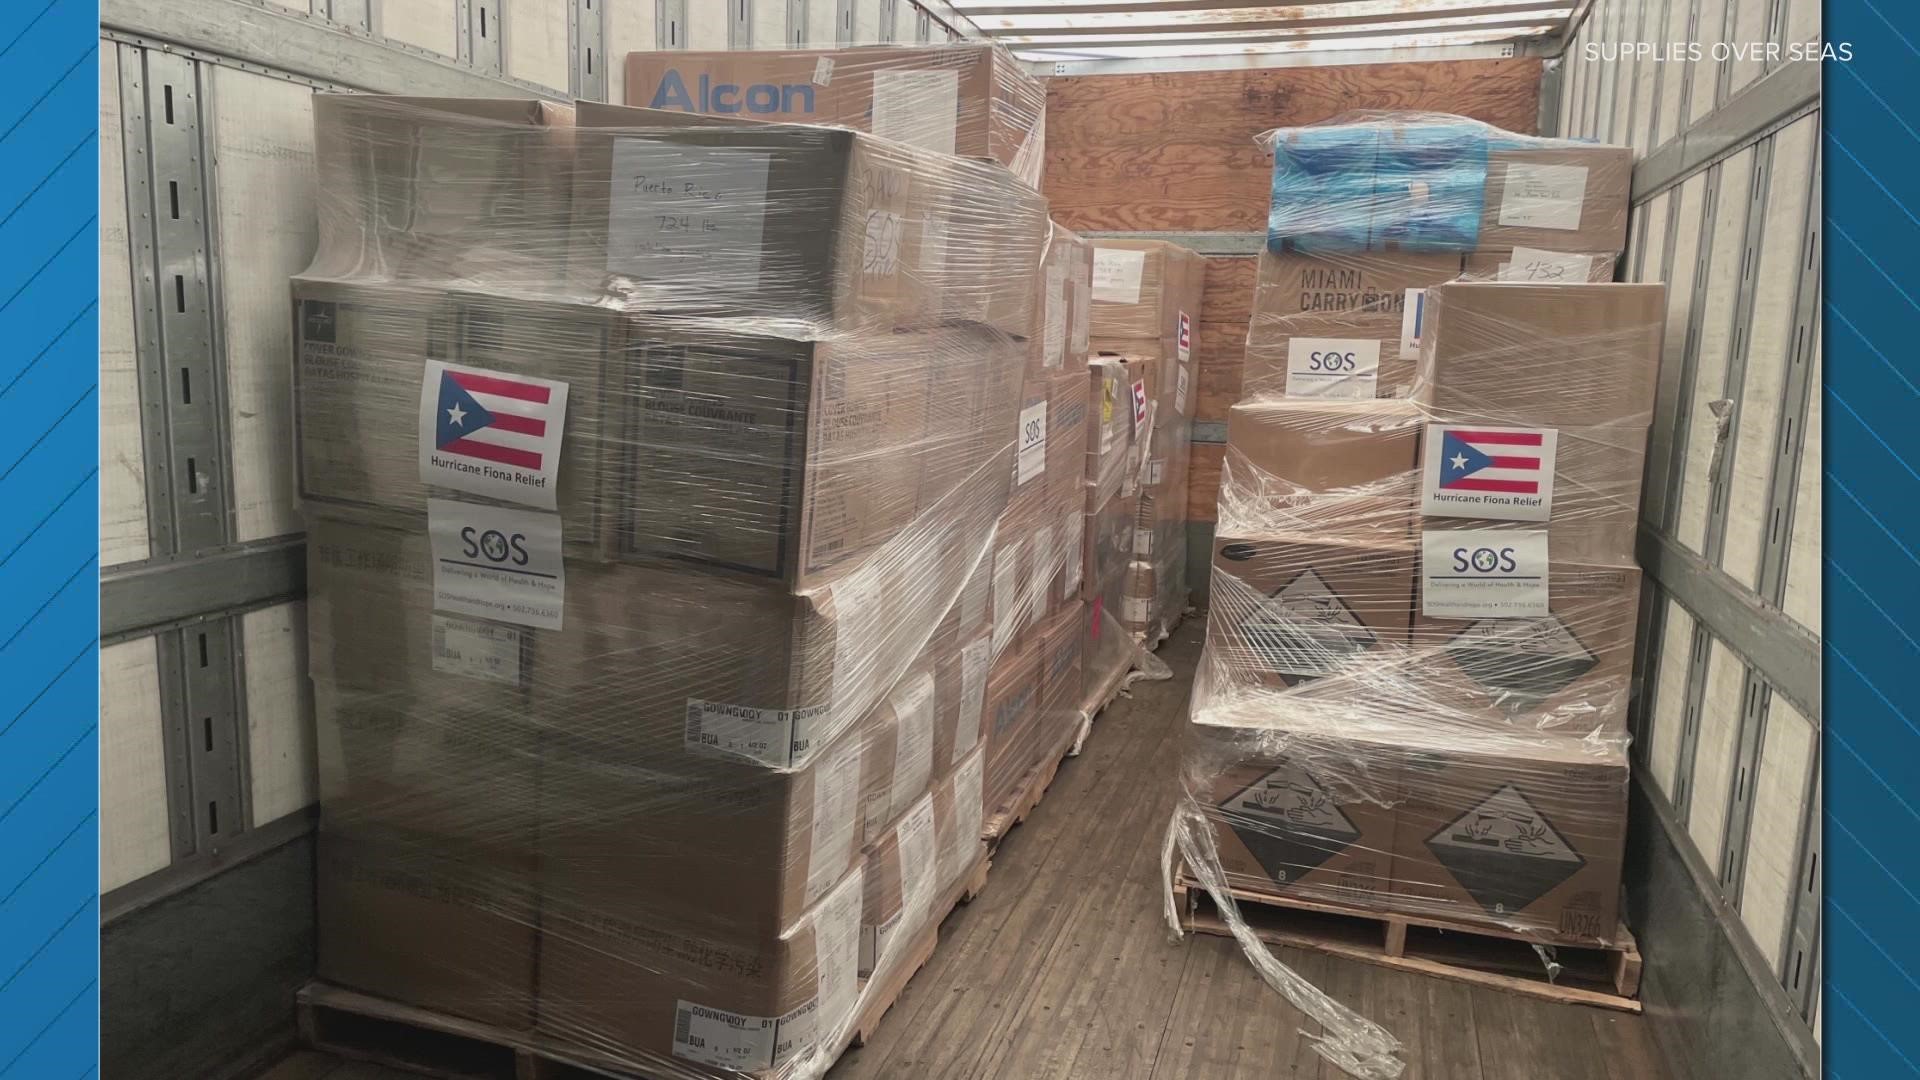 The organization is sending much needed supplies to Puerto Rico including bleach, wipes, and other cleaning supplies after the devastation of Hurricane Ian.